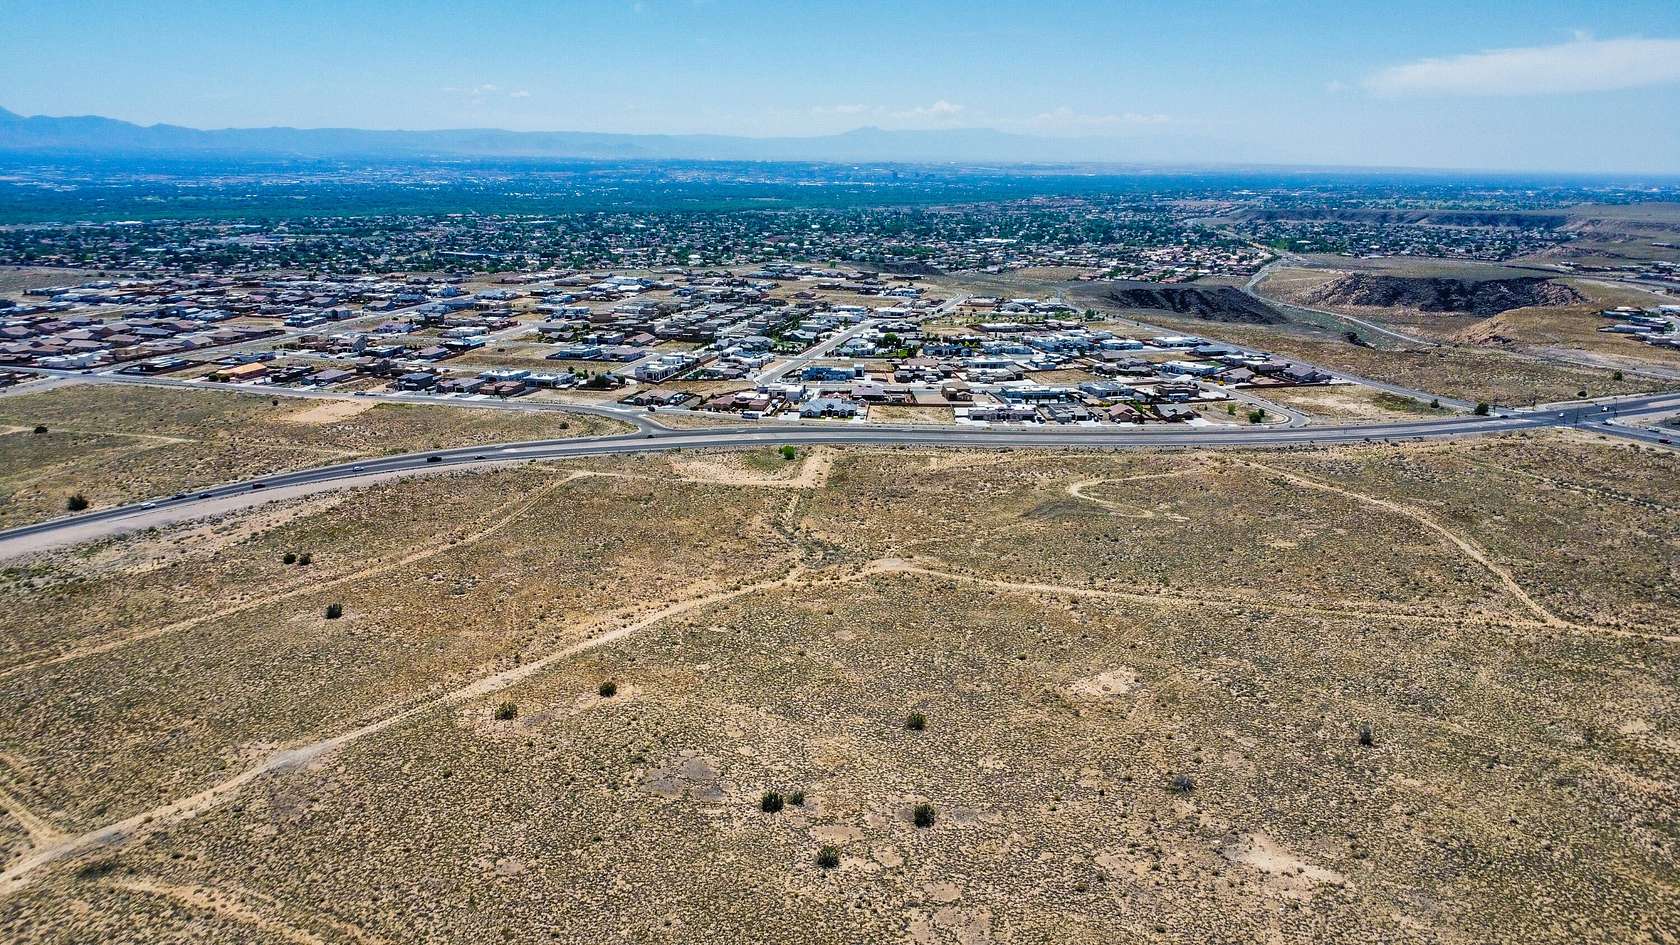 0.52 Acres of Residential Land for Sale in Albuquerque, New Mexico